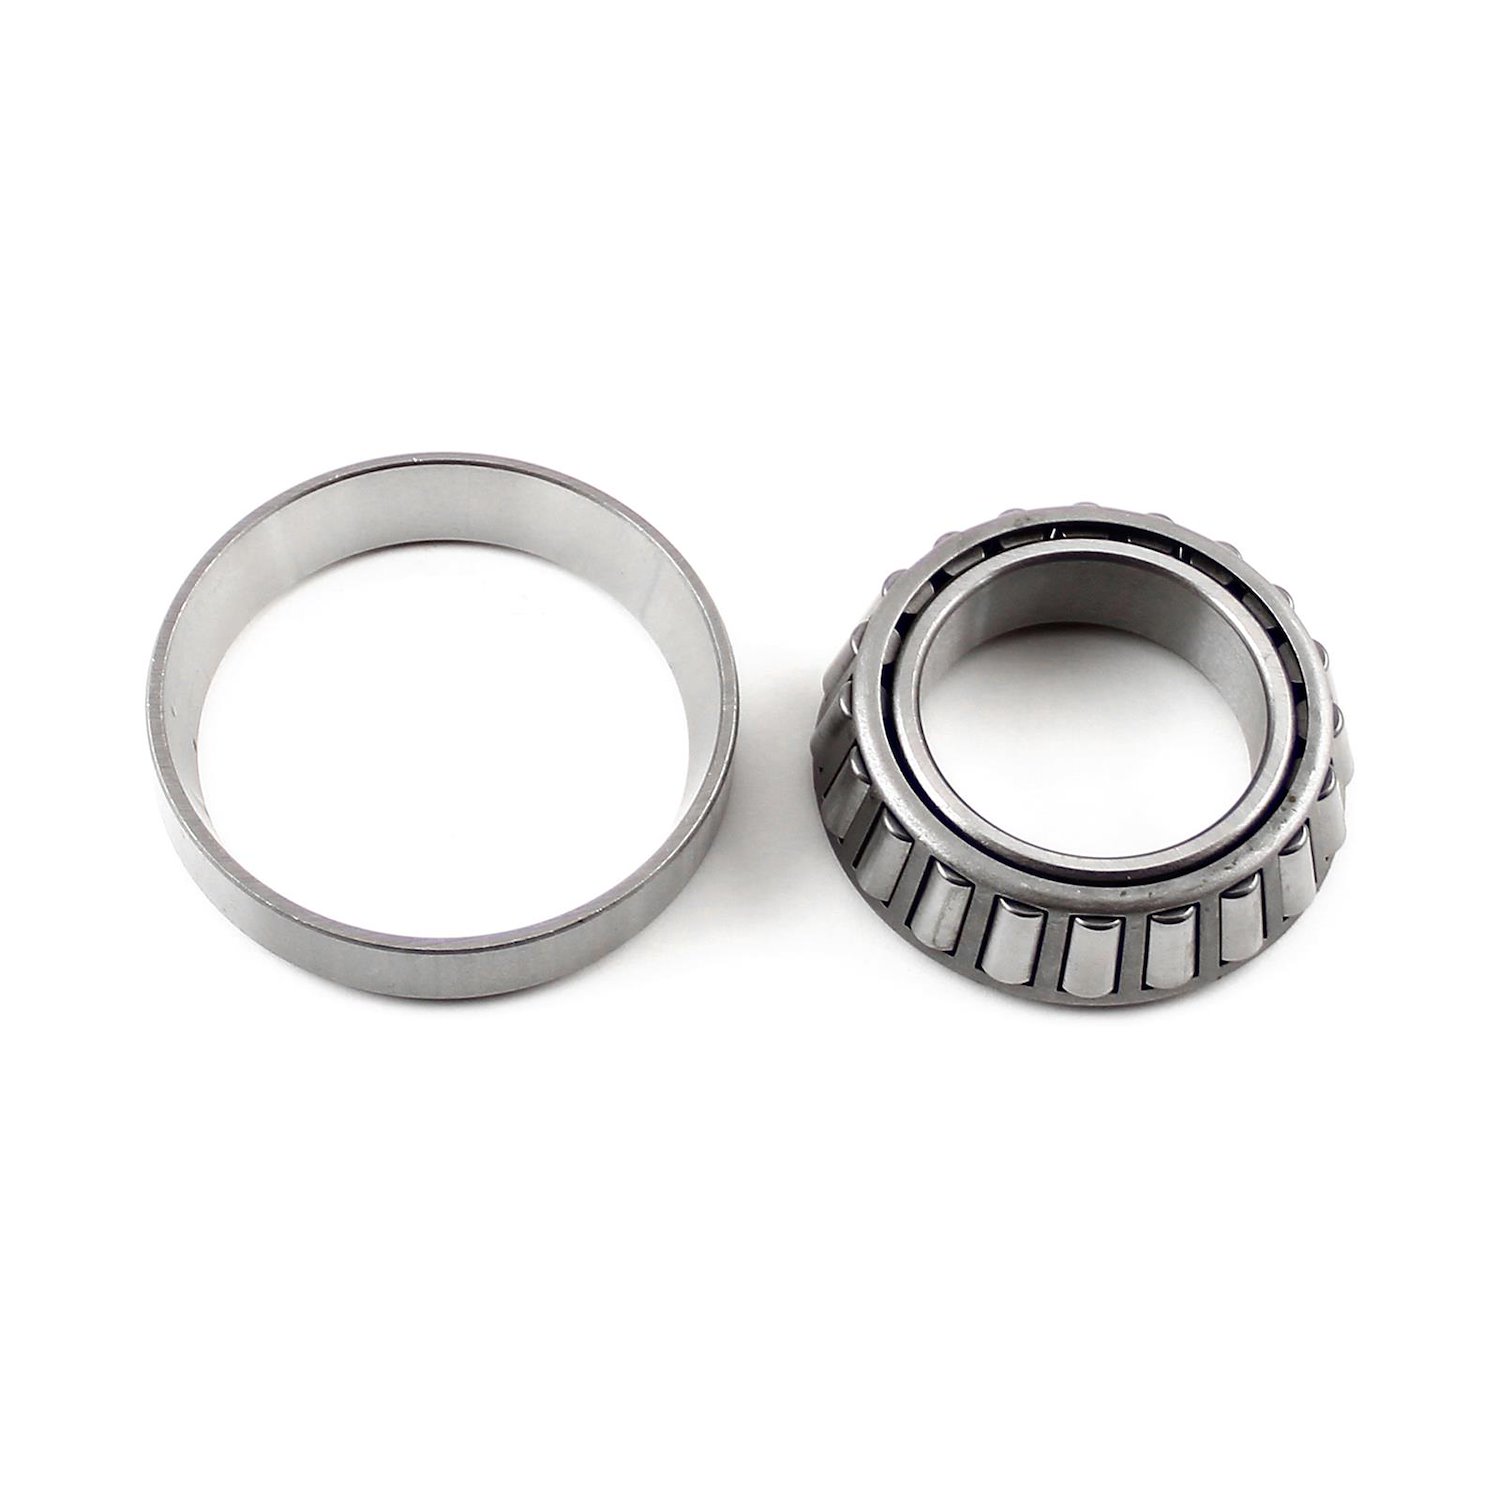 Carrier Bearing Industry Std Ref Lm603049/ 011